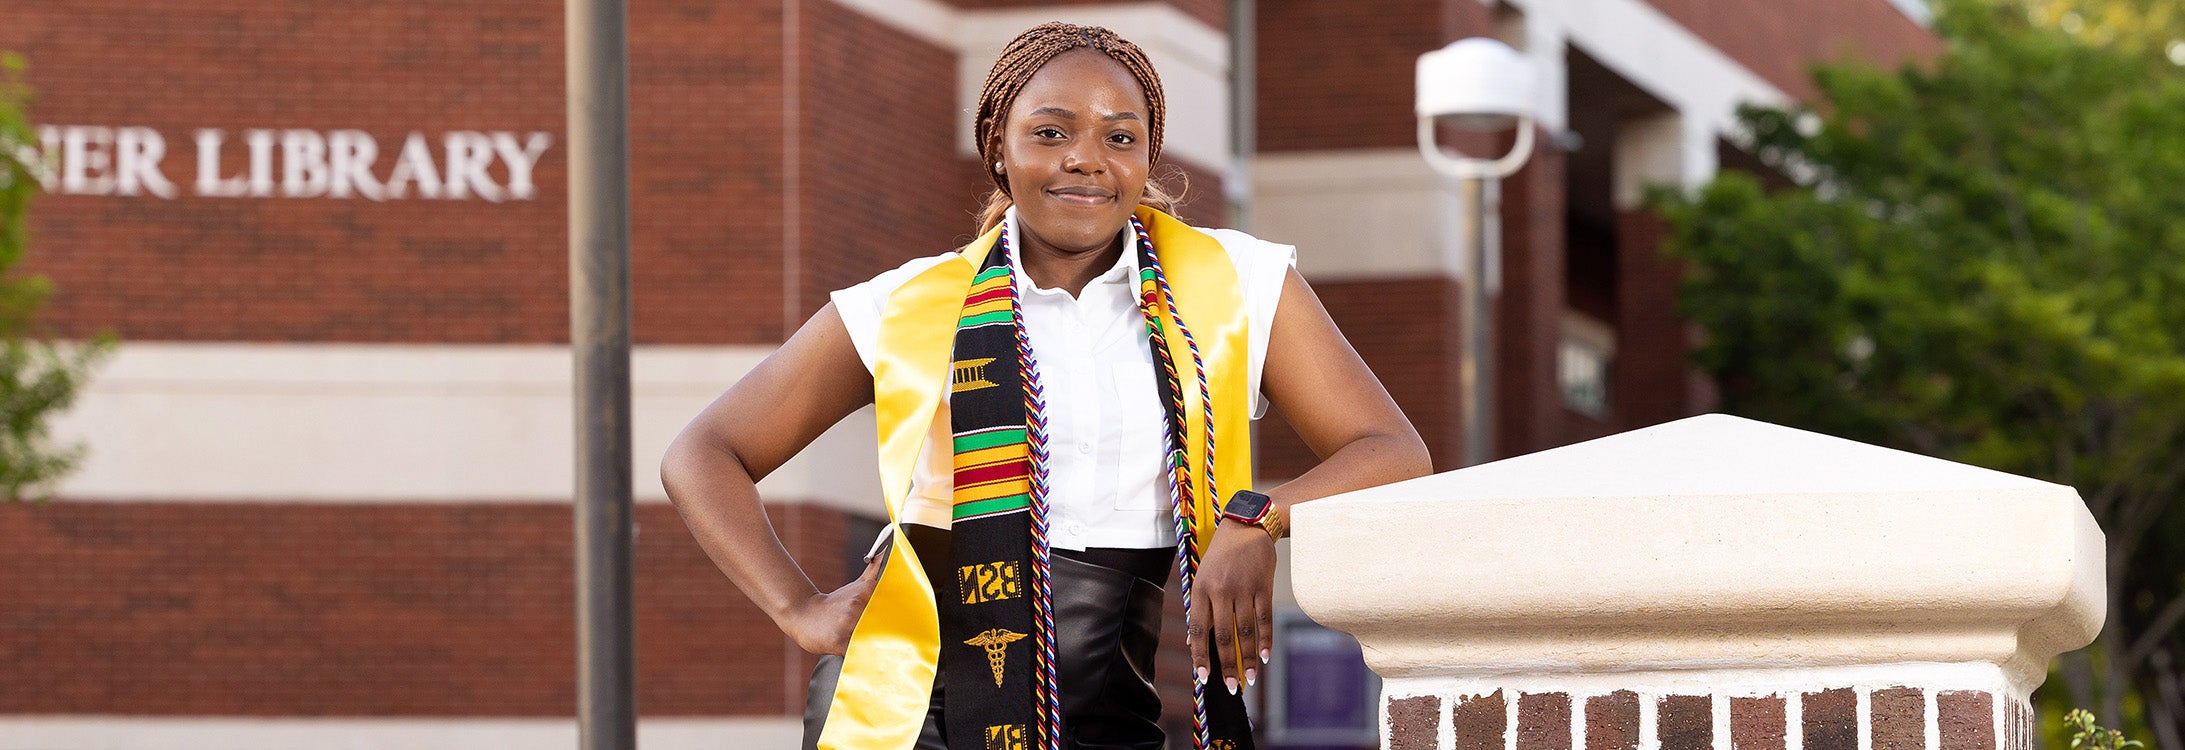 Esther Olajide graduated from East Carolina University's College of Nursing’s Bachelor of Nursing program after spending nearly a year deployed with the Navy.